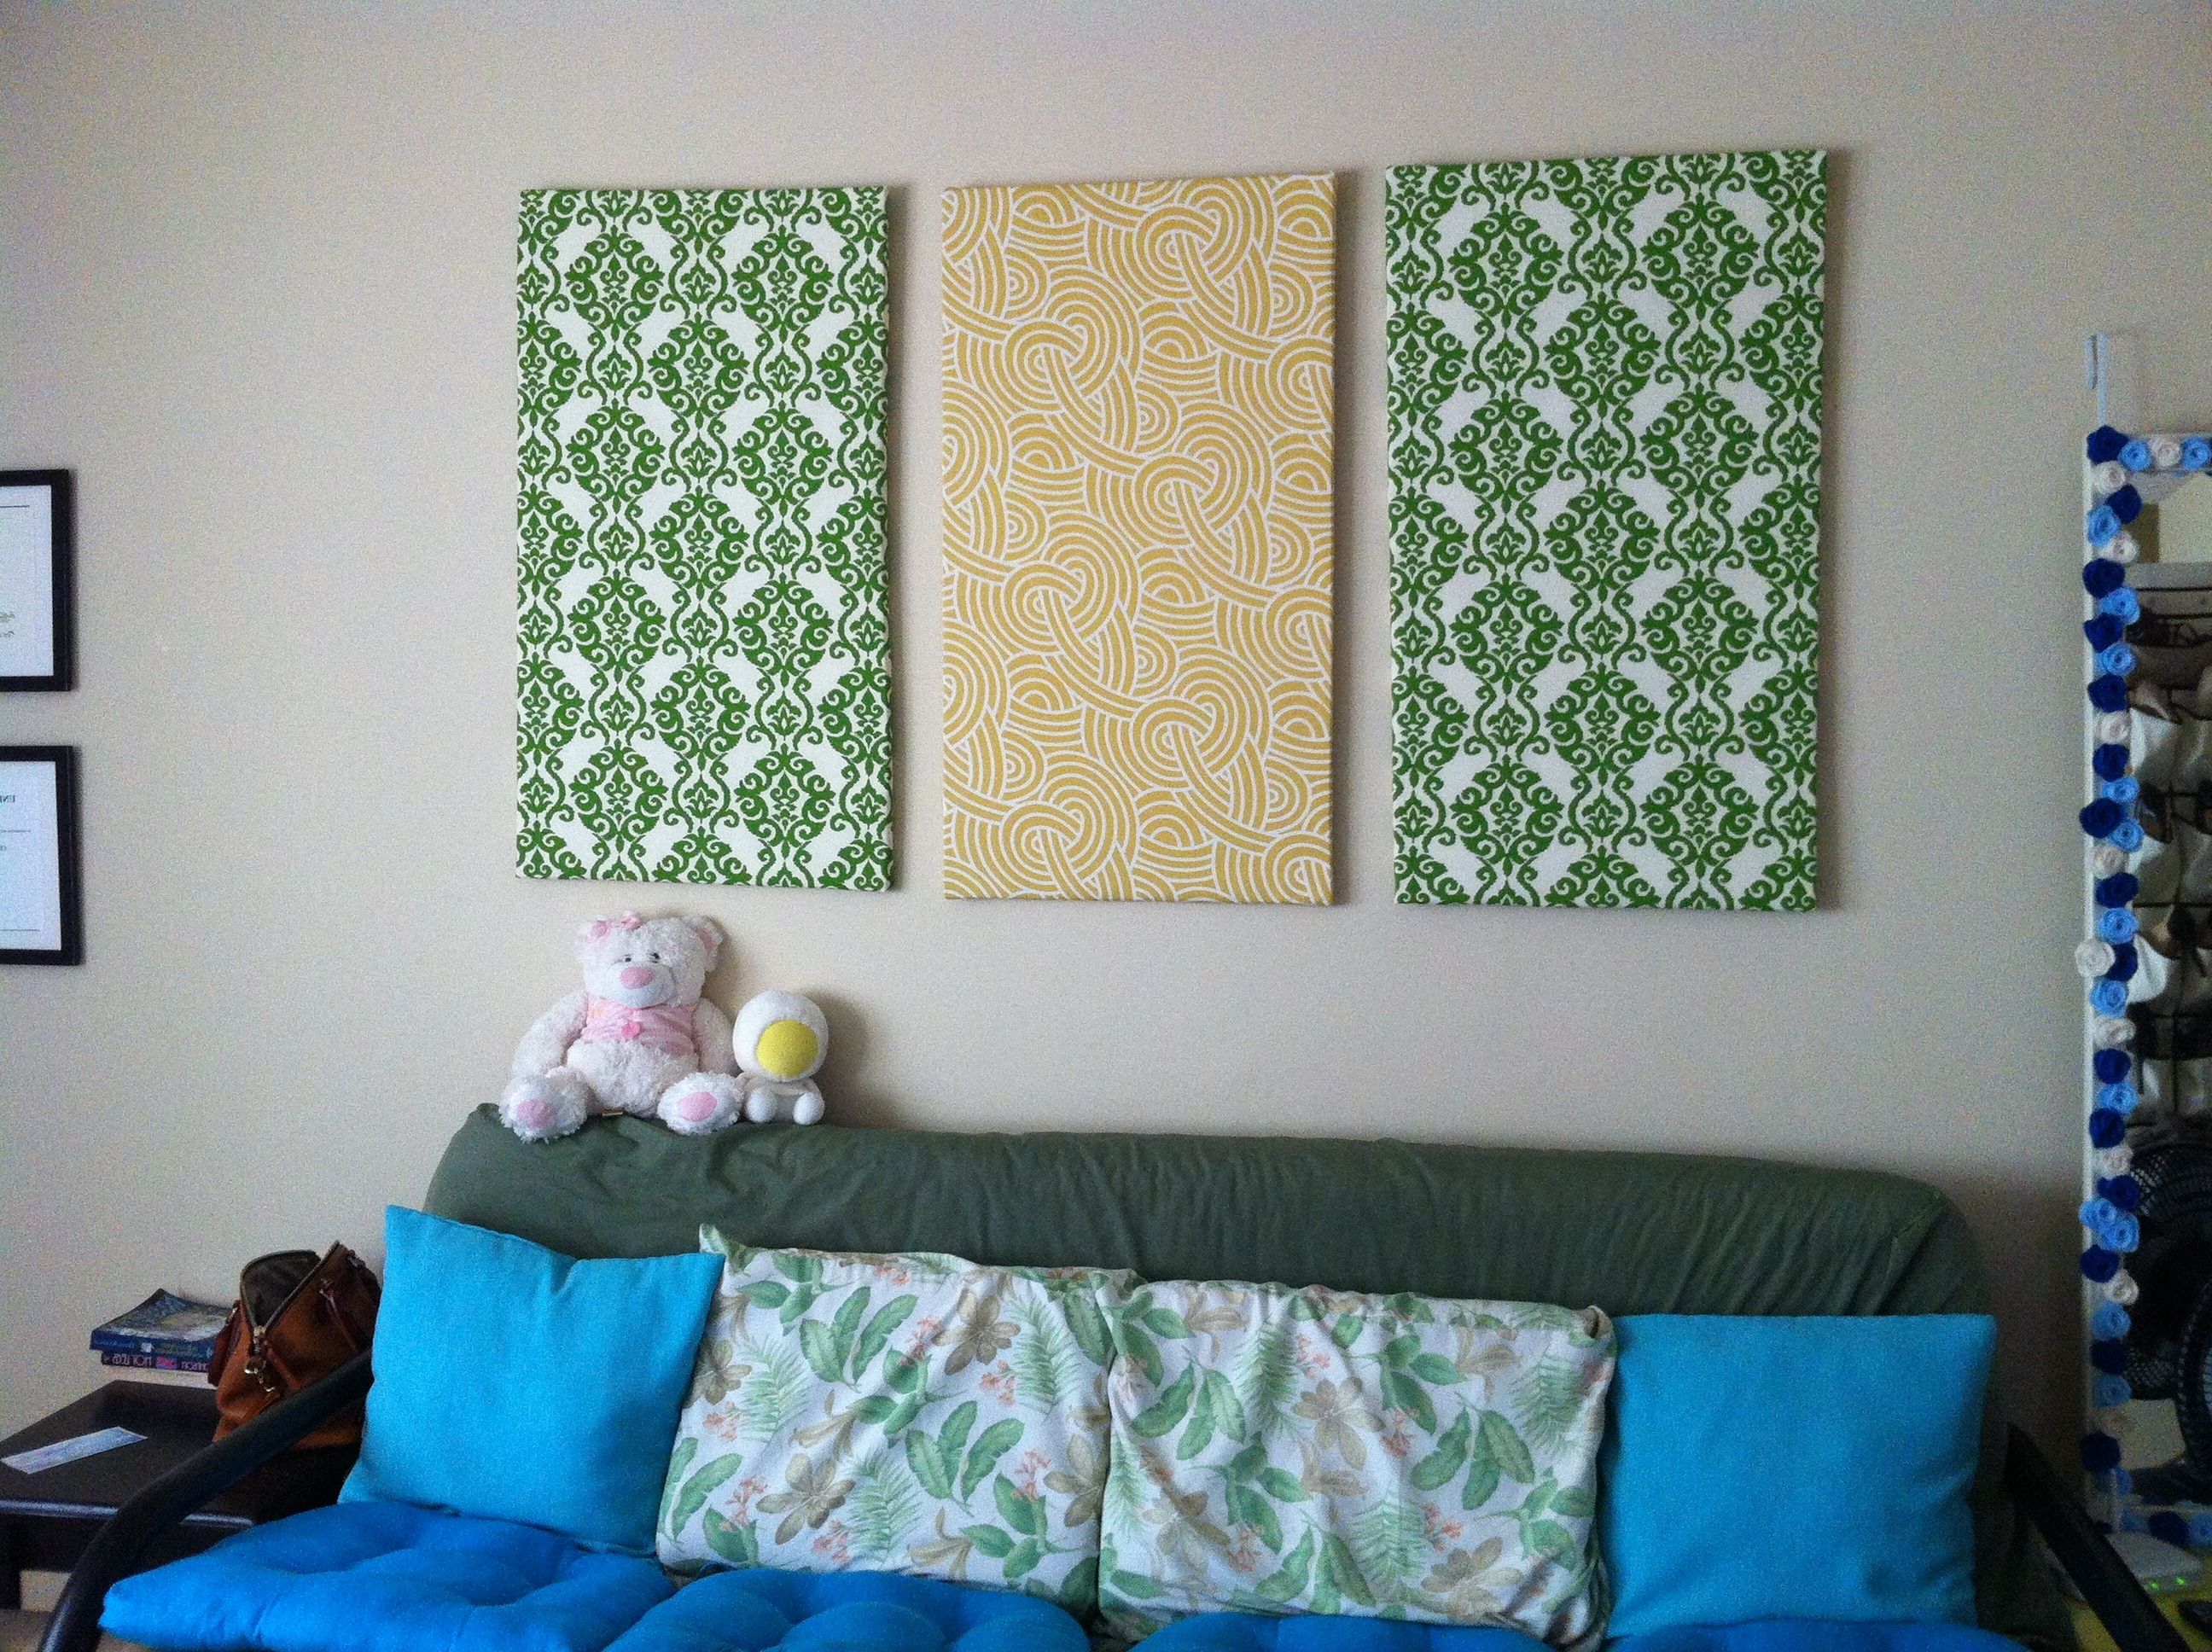 Diy Fabric Covered Wall Art Intended For Best And Newest Art: Diy Fabric Wall Art (View 11 of 15)